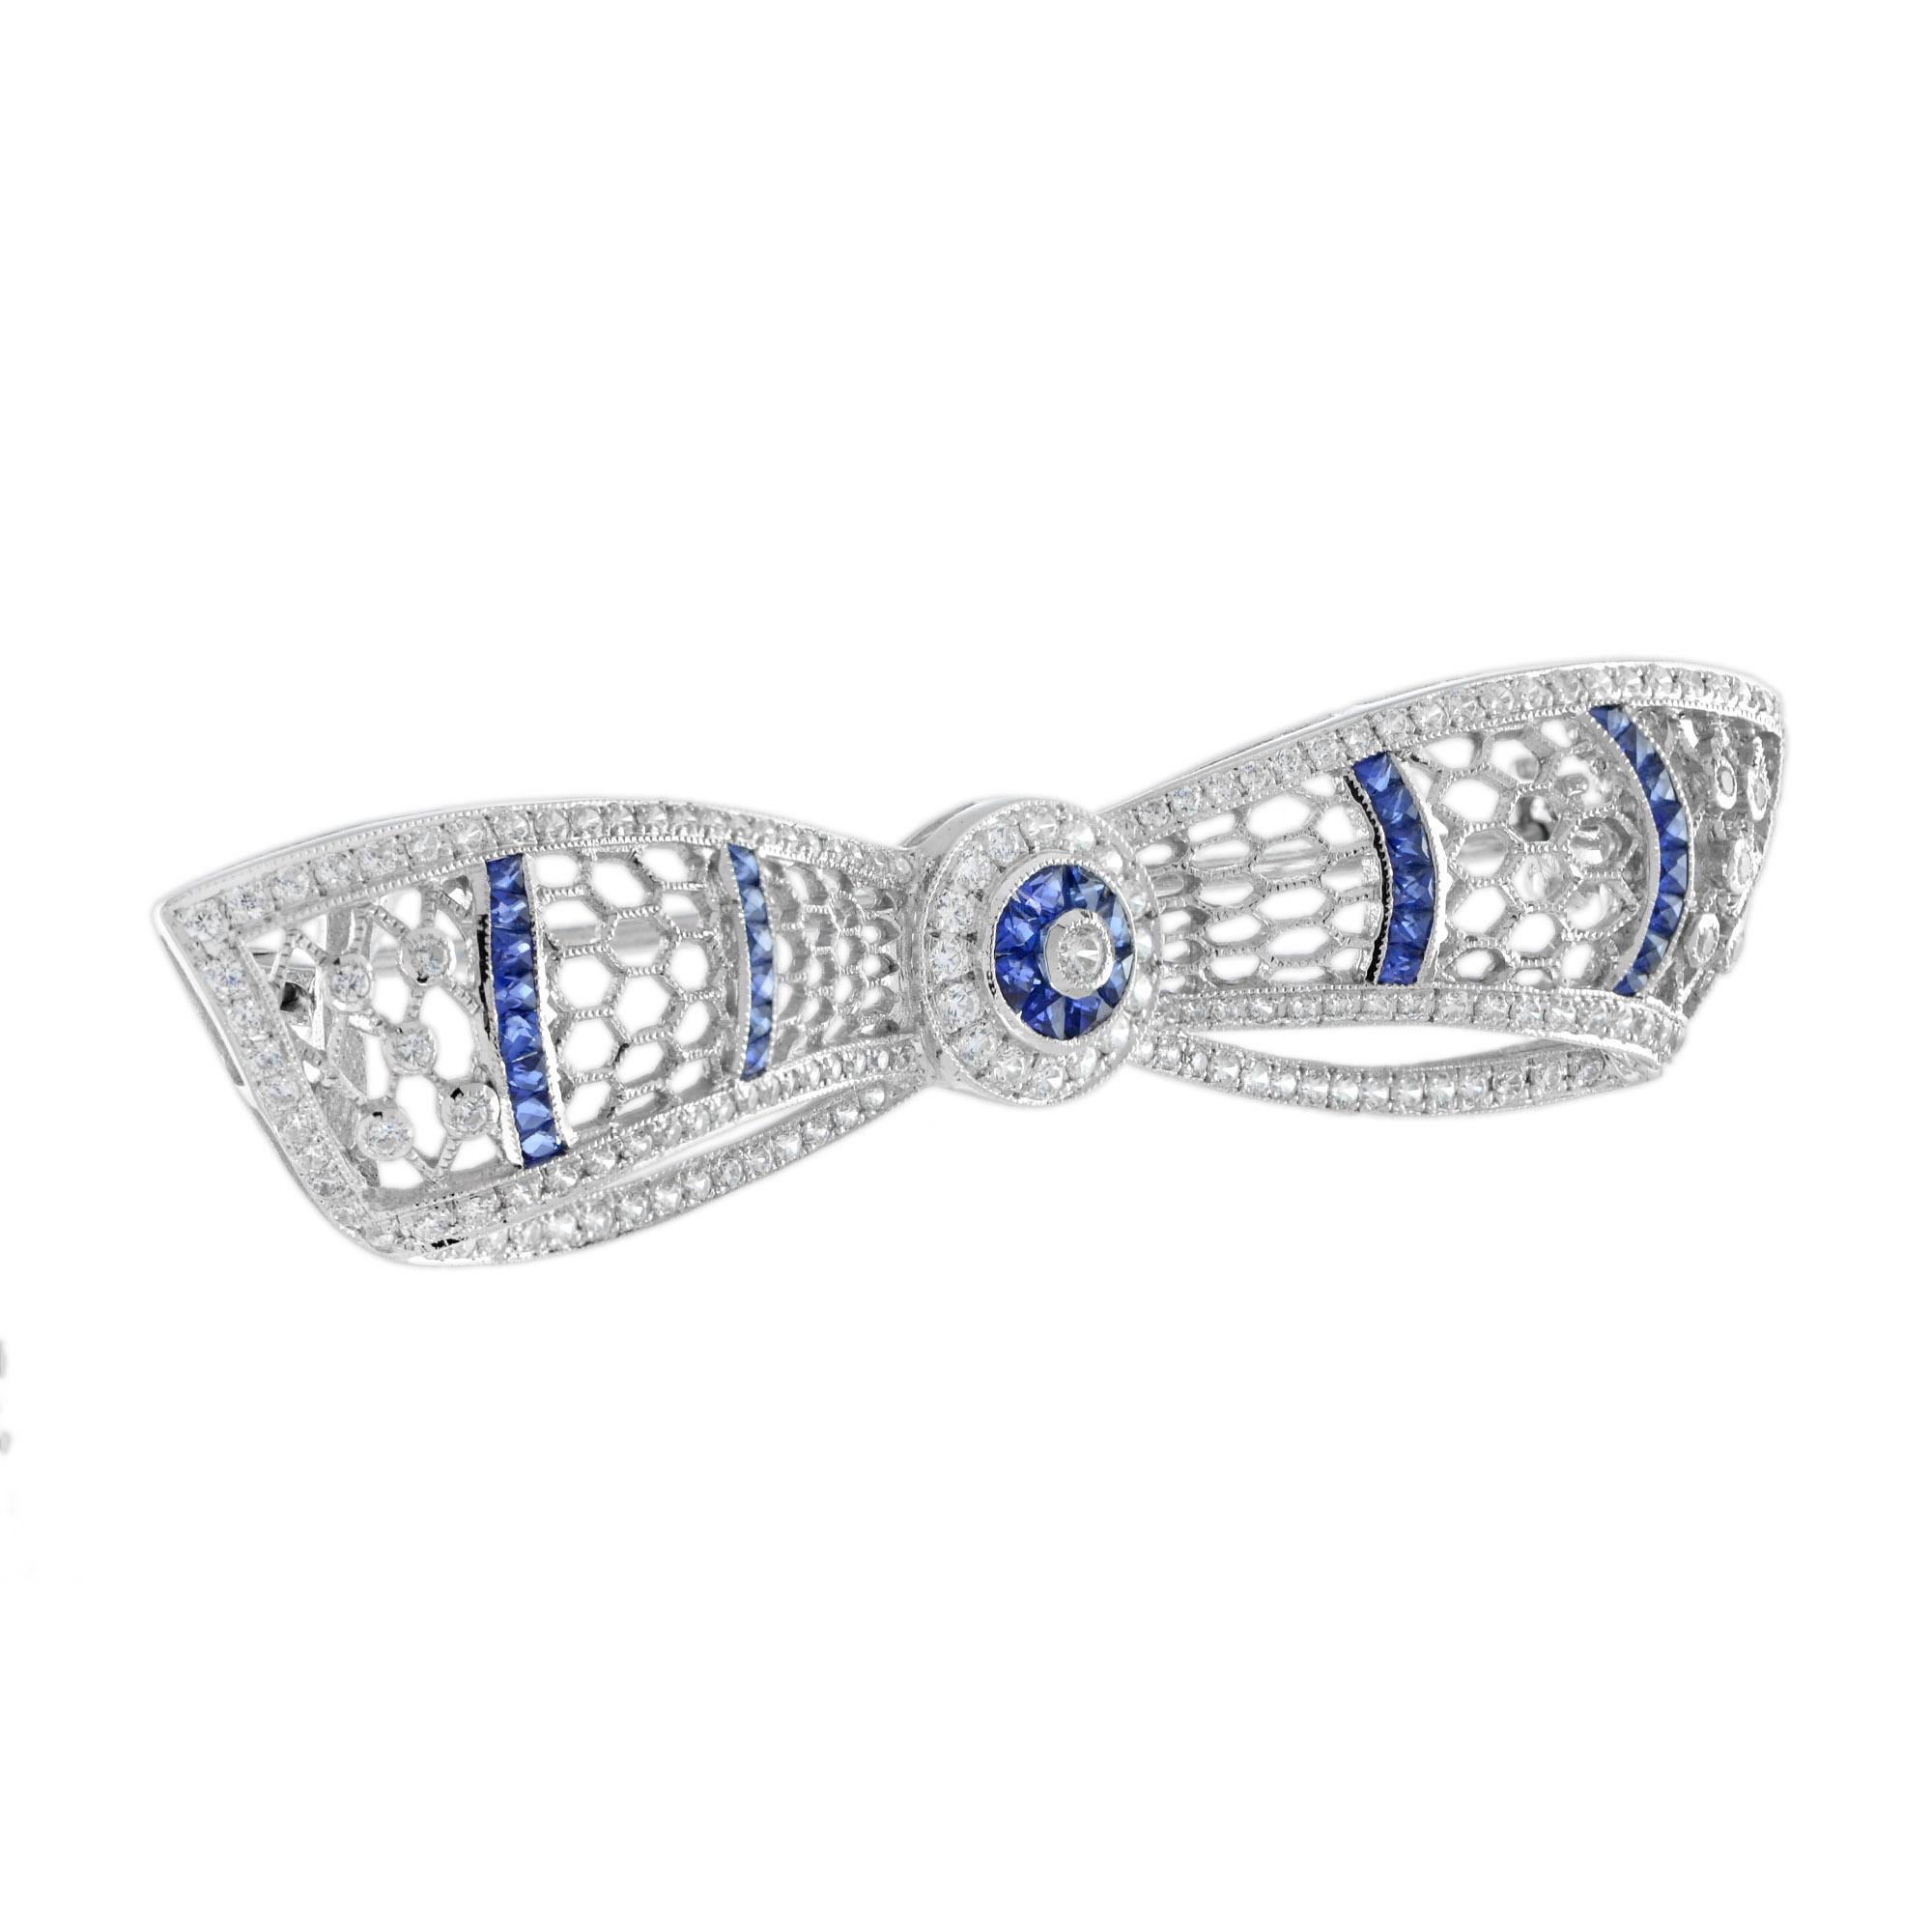 A truly beautiful white gold bow brooch set with diamonds and French cut sapphires. The milgraining of the metal edges allow the diamonds and gemstones to sparkle without competing with the reflected light from a highly polished white gold edge.